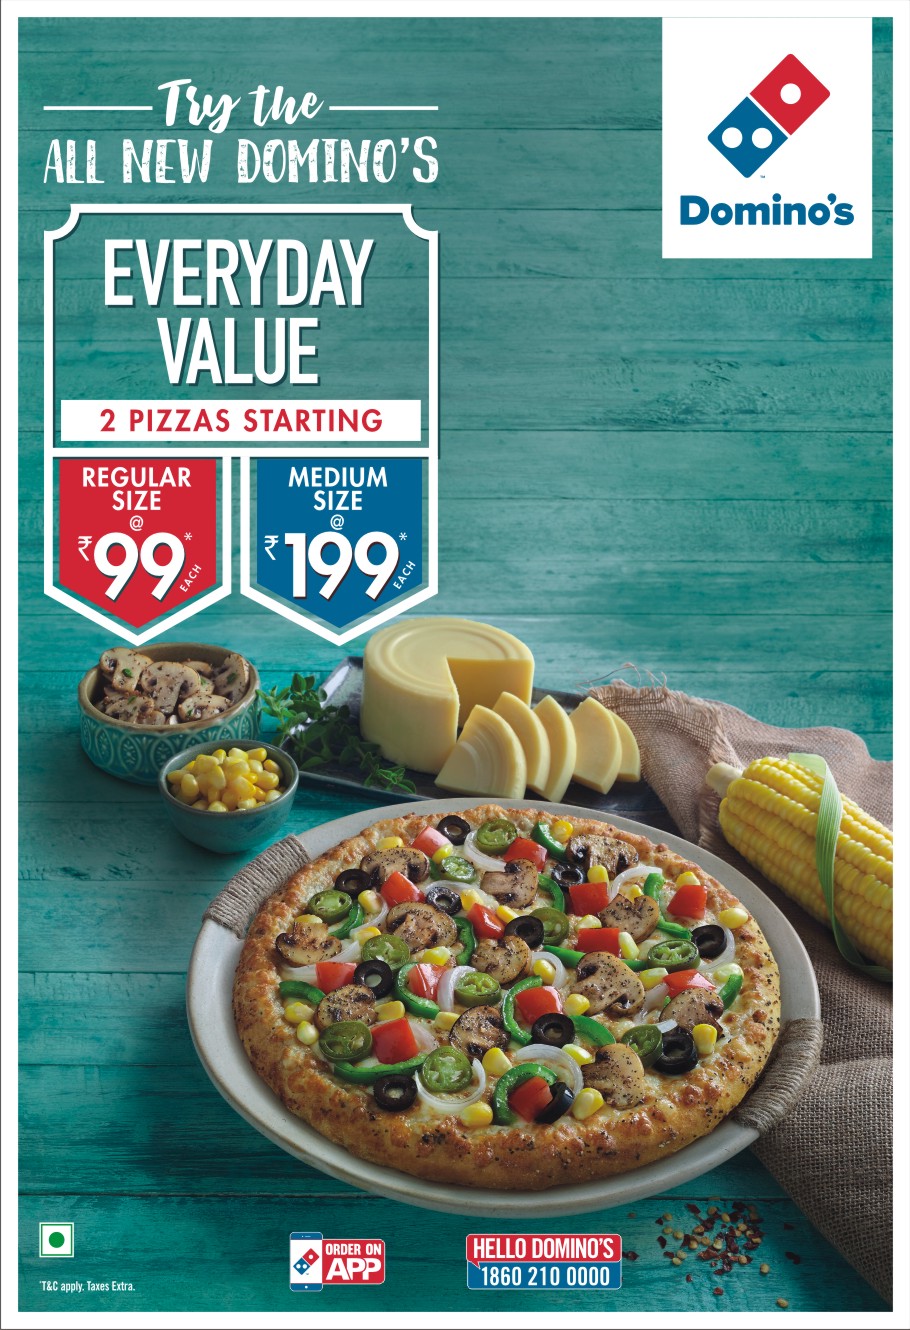 All-The-New-Dominos-Design